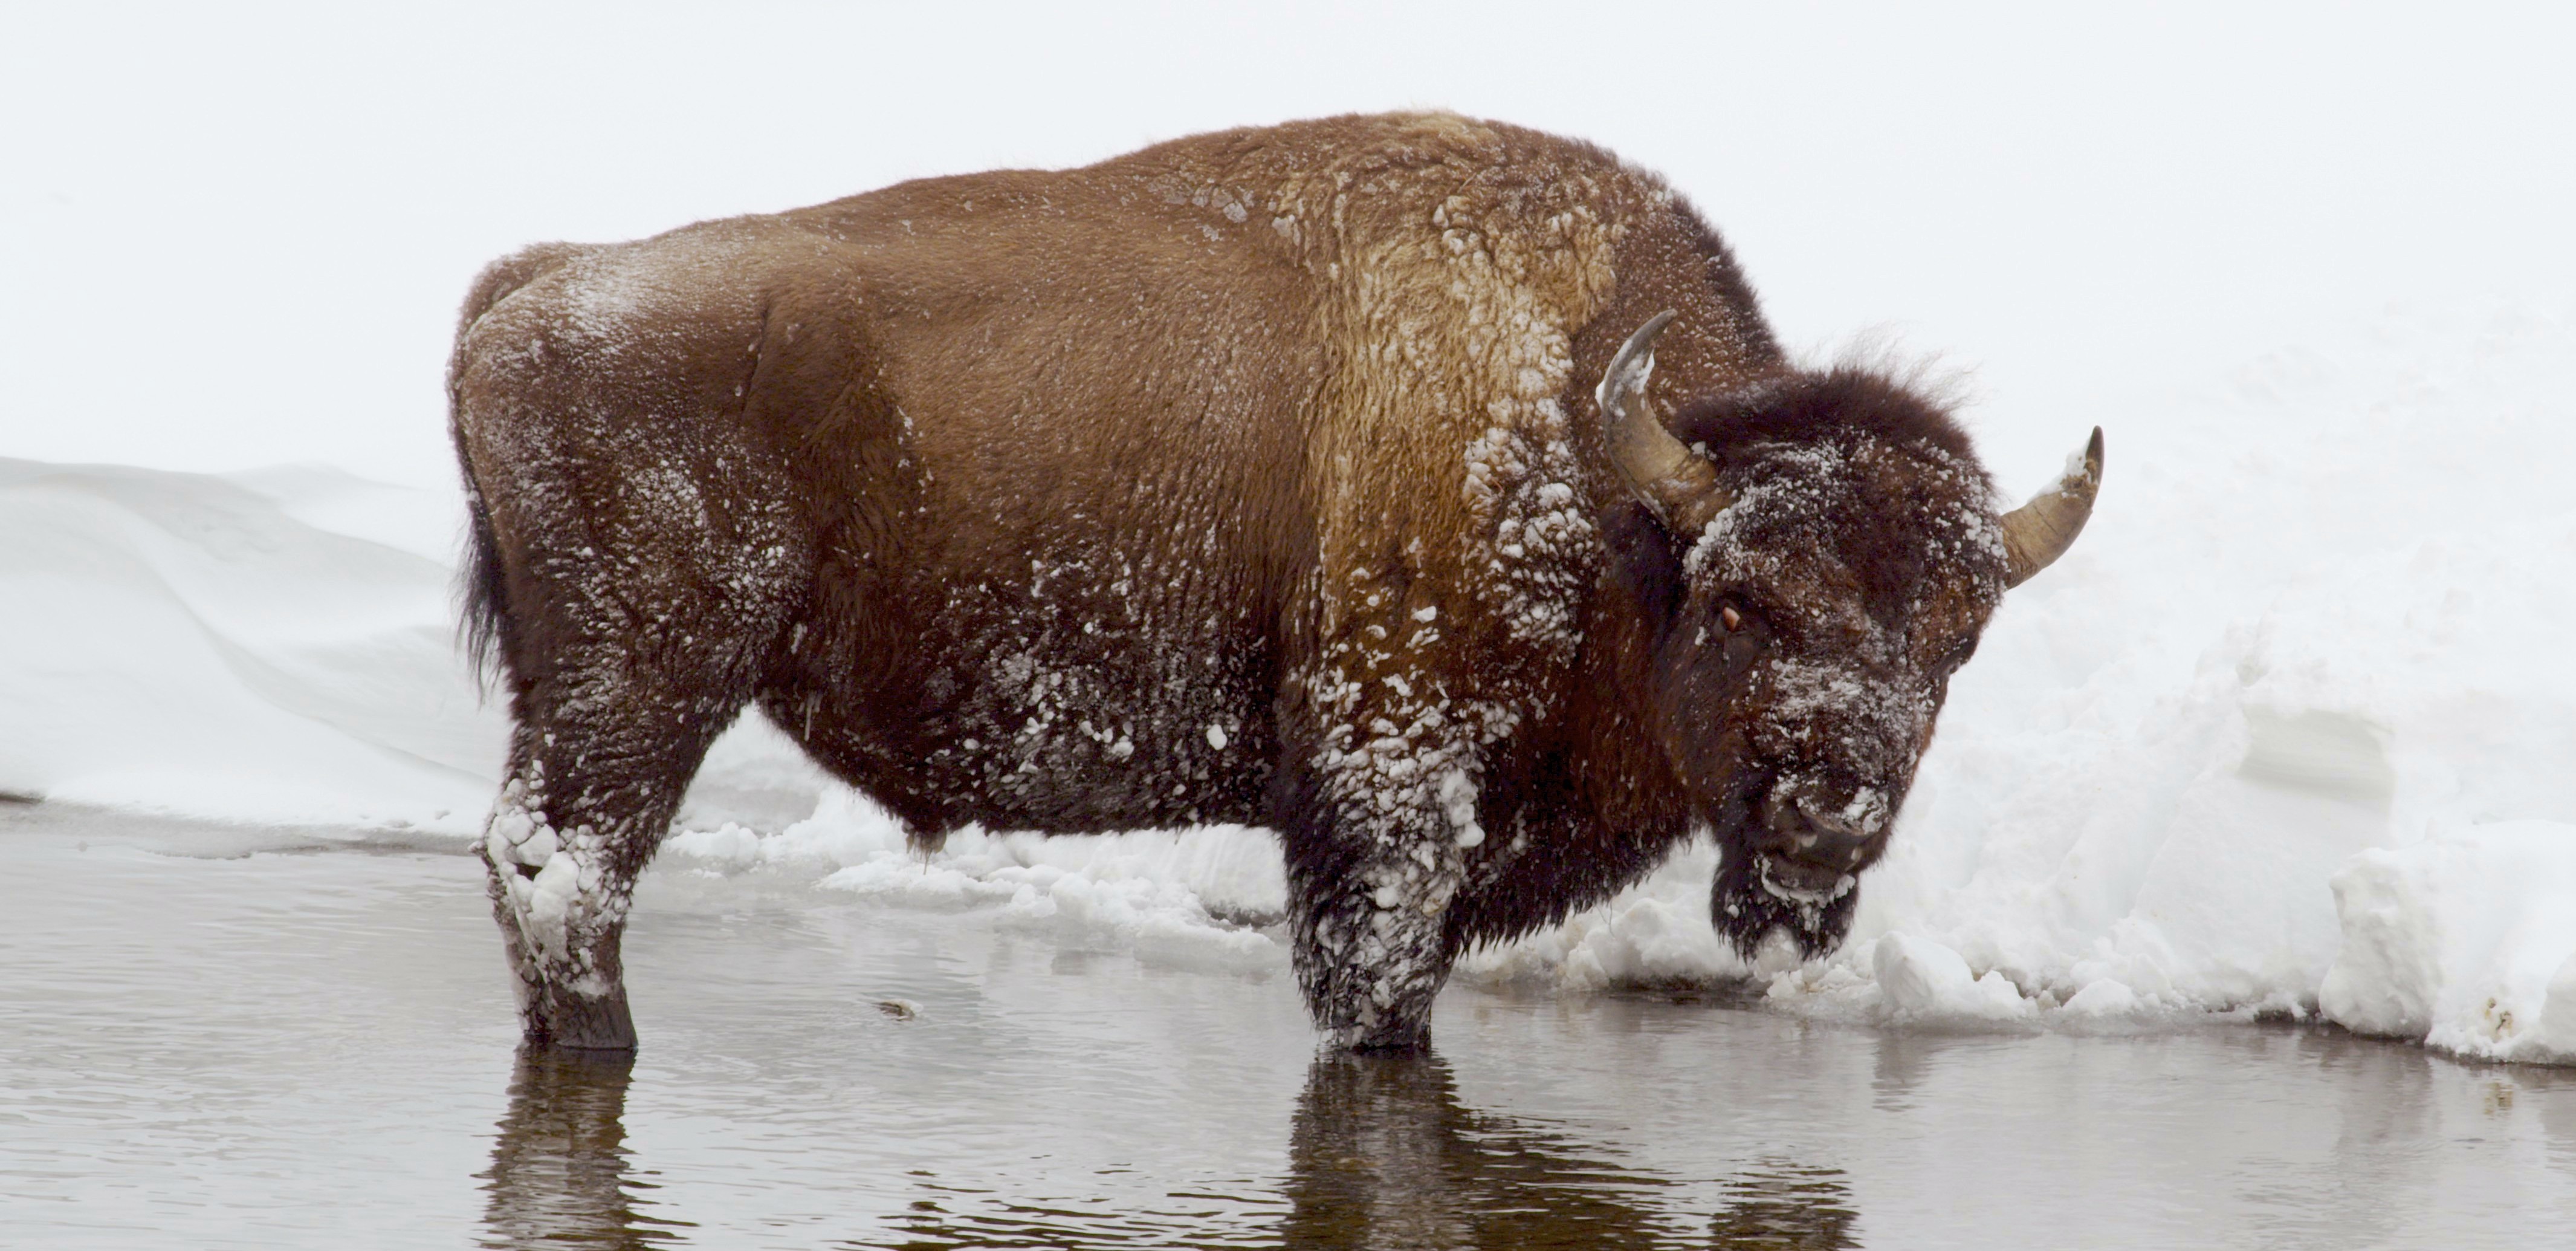 Bison in Yellowstone National Park, Winter 2014